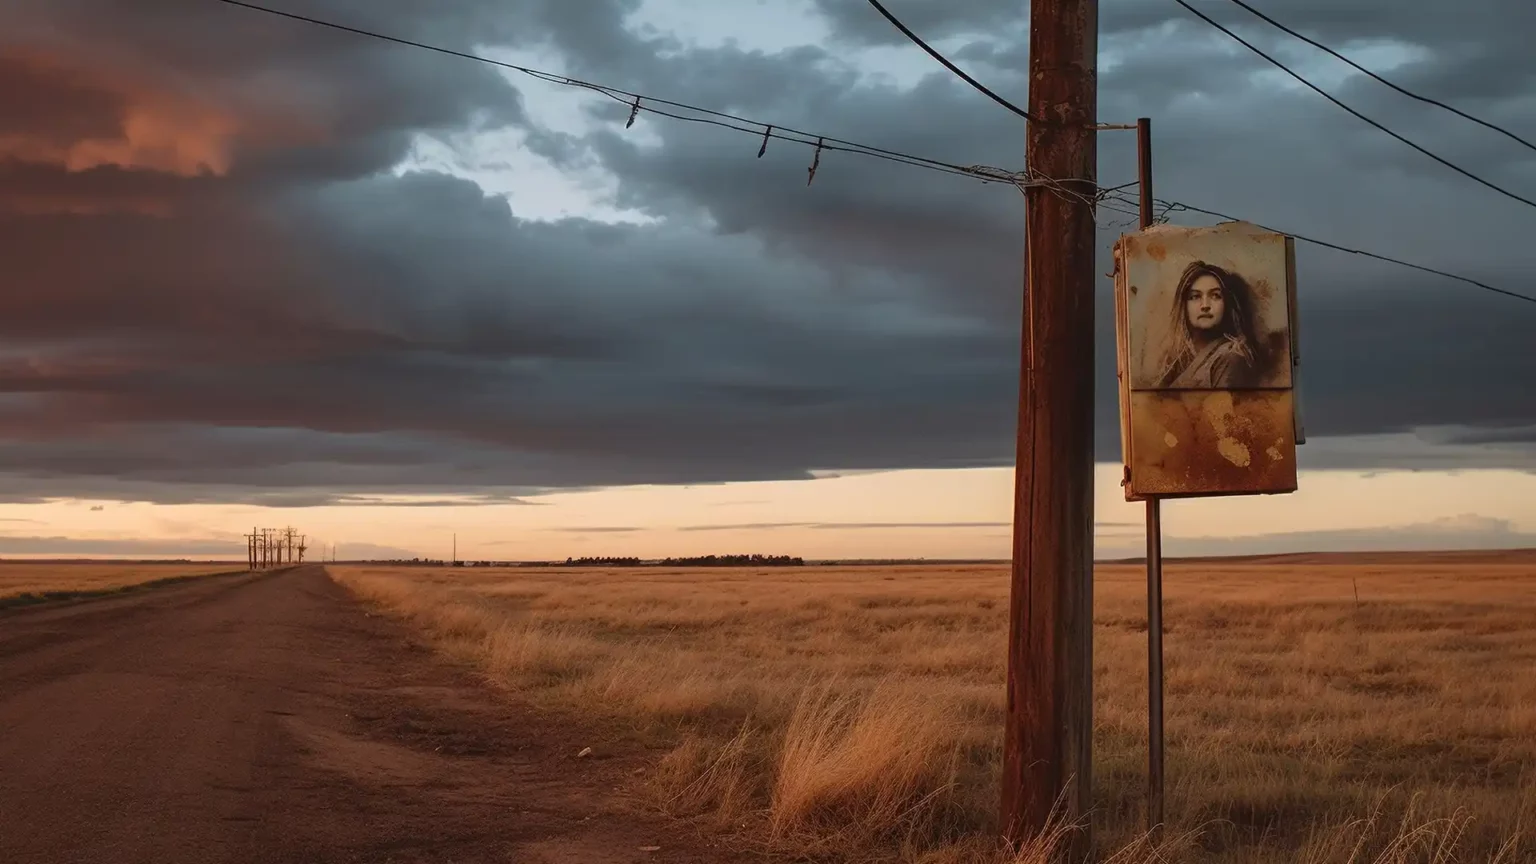 A weathered missing persons poster attached to a telephone pole in a desolate landscape at dusk, symbolizing the loneliness and despair of unsolved disappearances.